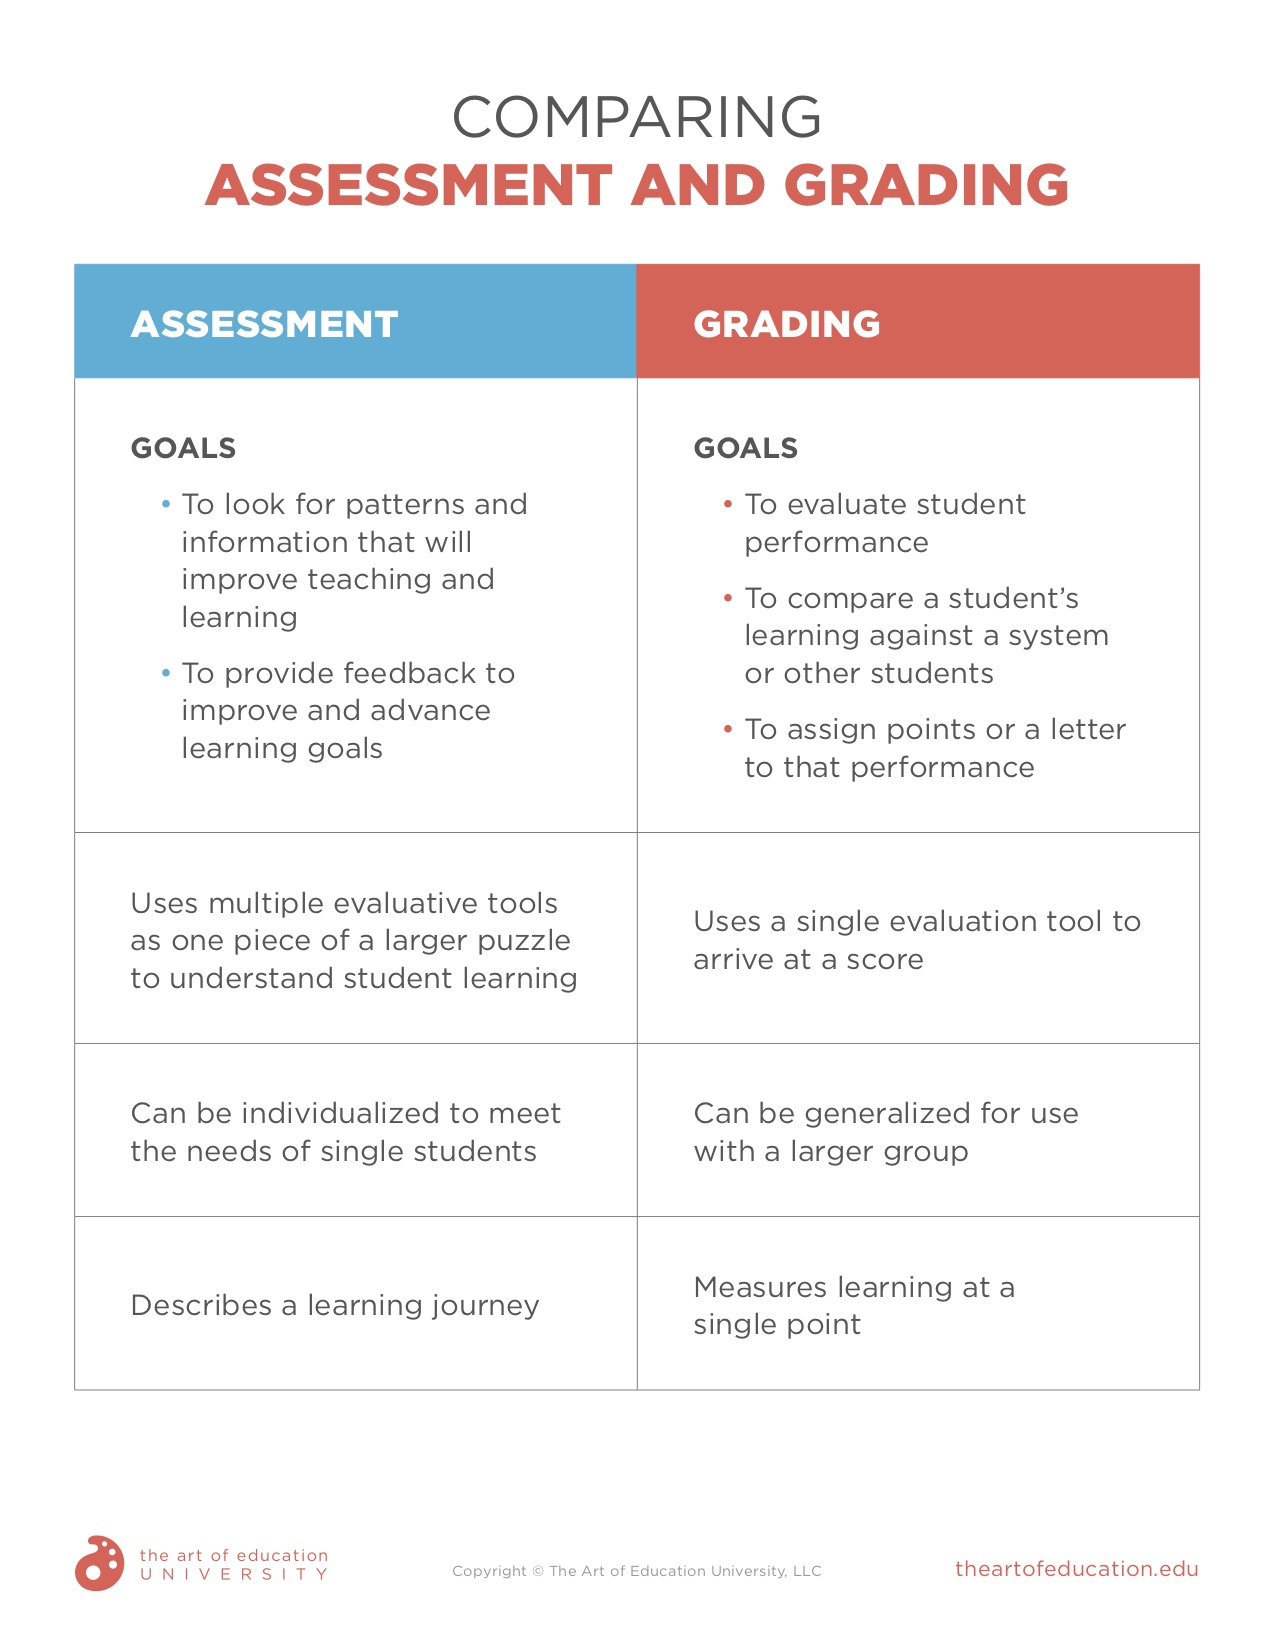 https://uploads.theartofeducation.edu/2022/02/94.1_Comparing-Assessment-and-Grading.pdf